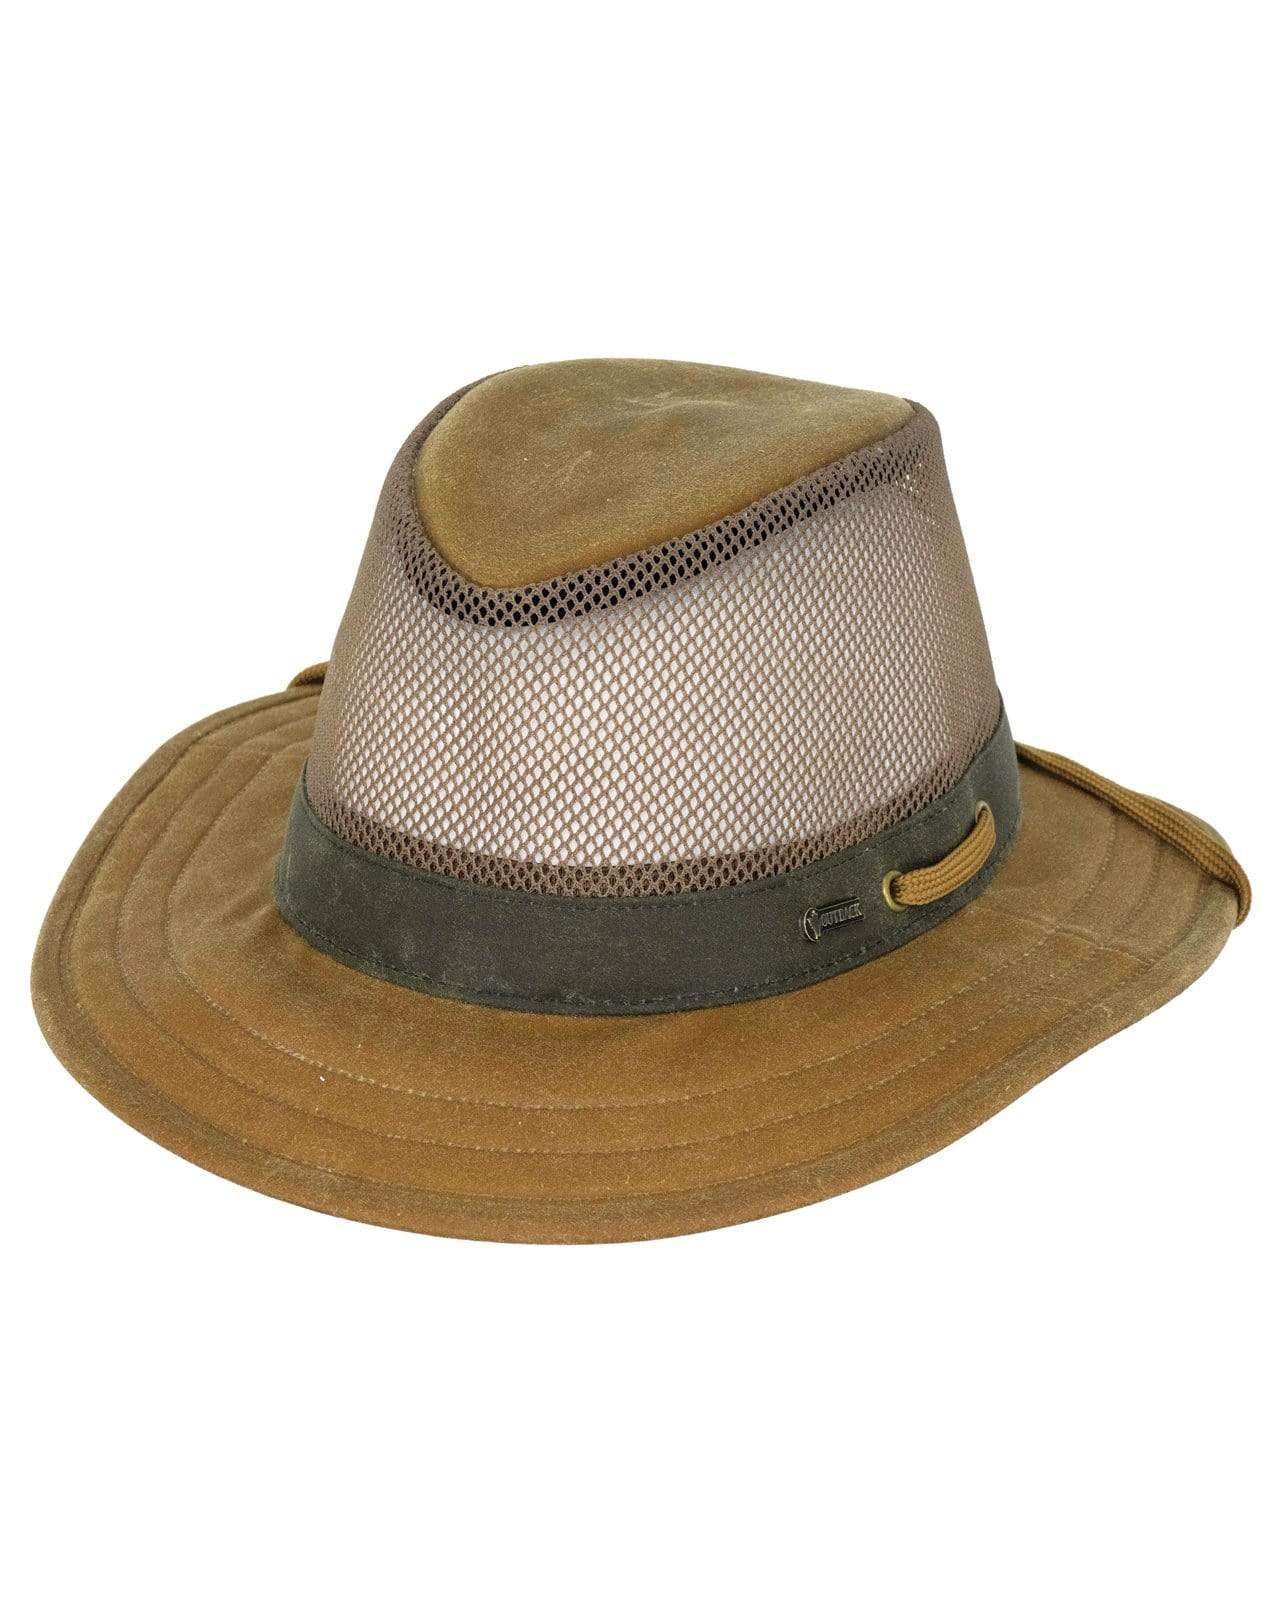 Outback Trading Company Willis with Mesh Field Tan / S 1470-FTN-S 789043012422 Hats